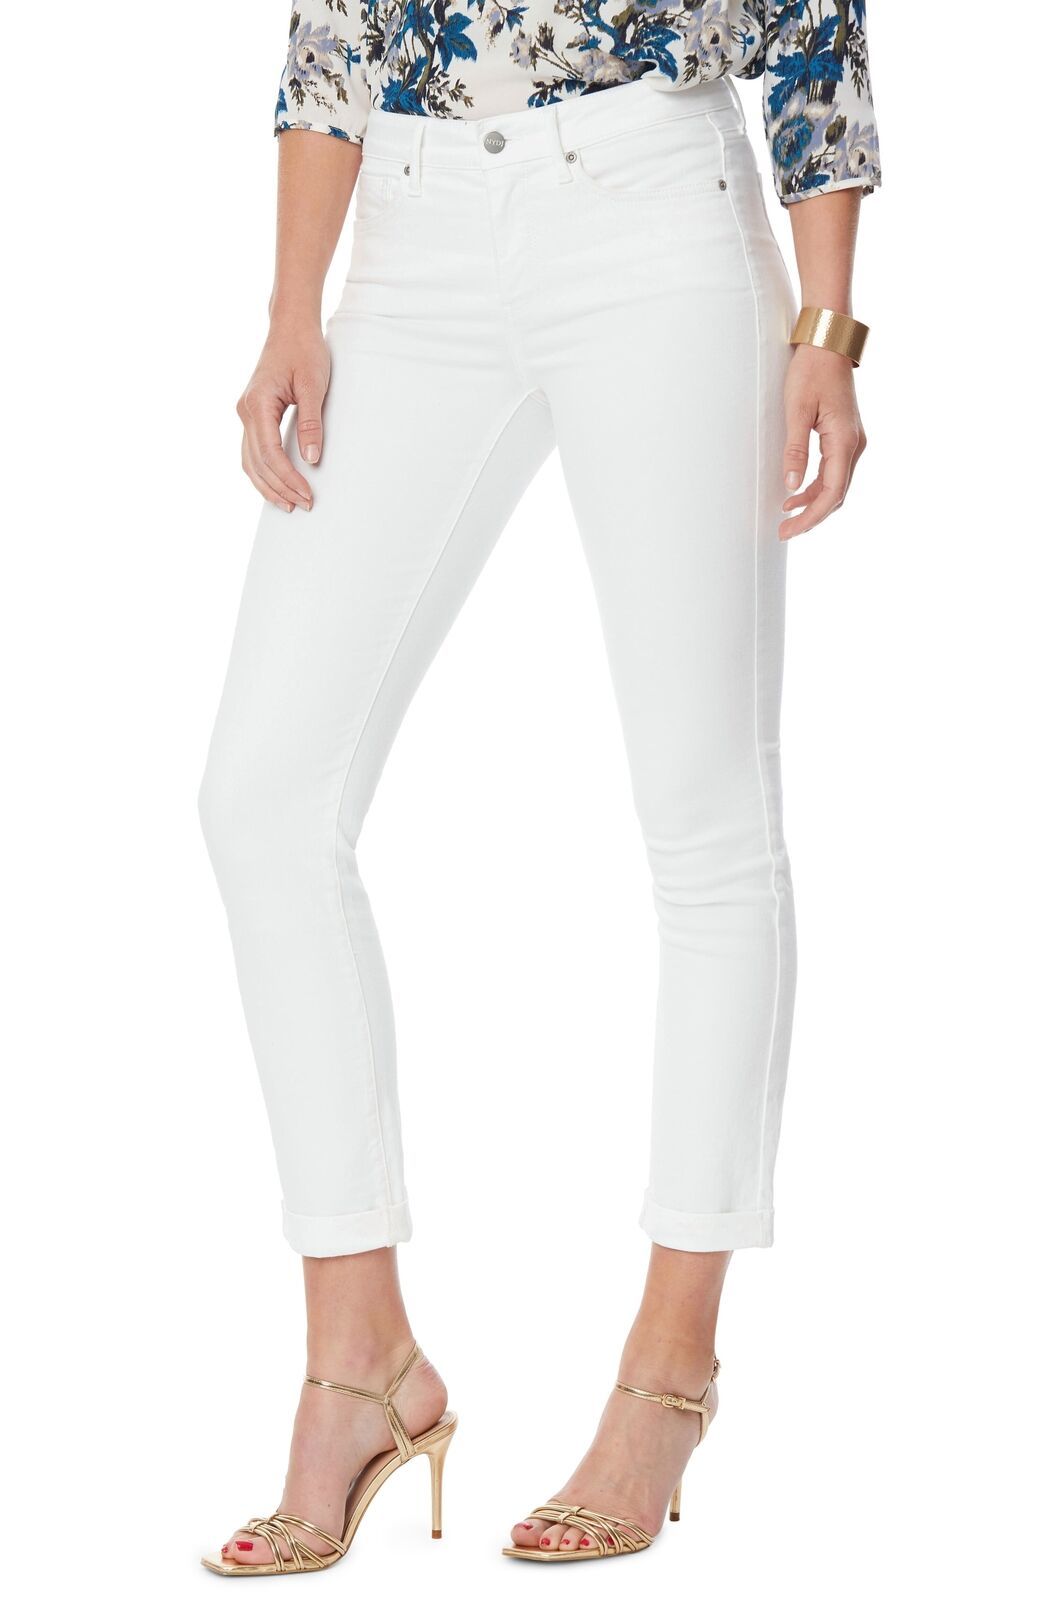 NYDJ OPTIC WHITE Women's Sheri Slim Ankle Jeans with Roll Cuff, US 10